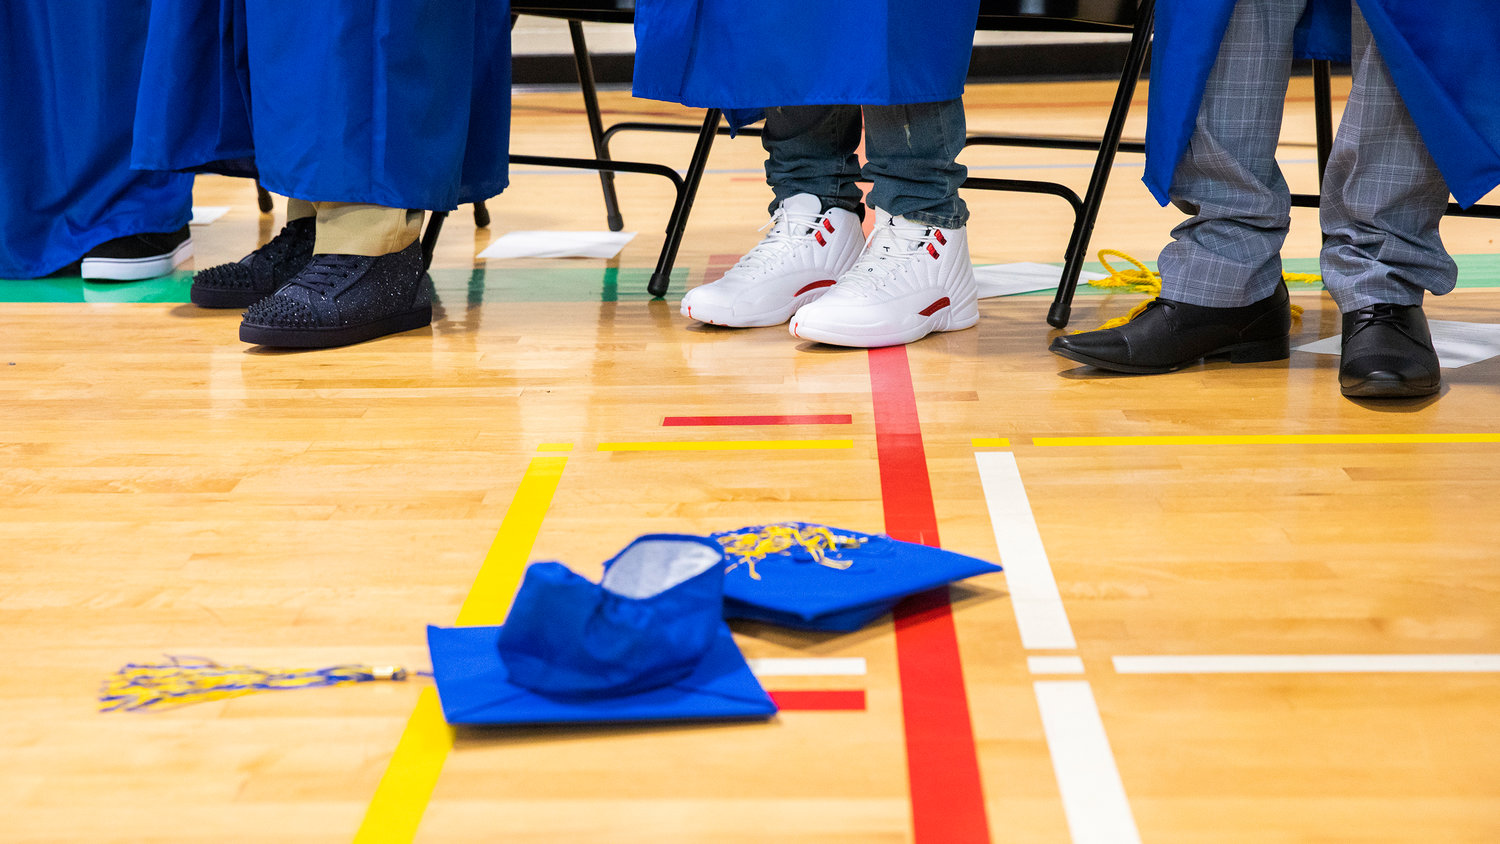 Caps and tassels rest on the floor of the gym below clean pairs of shoes during a graduation ceremony for Centralia College graduates held at the Green Hill School on Wednesday in Chehalis.